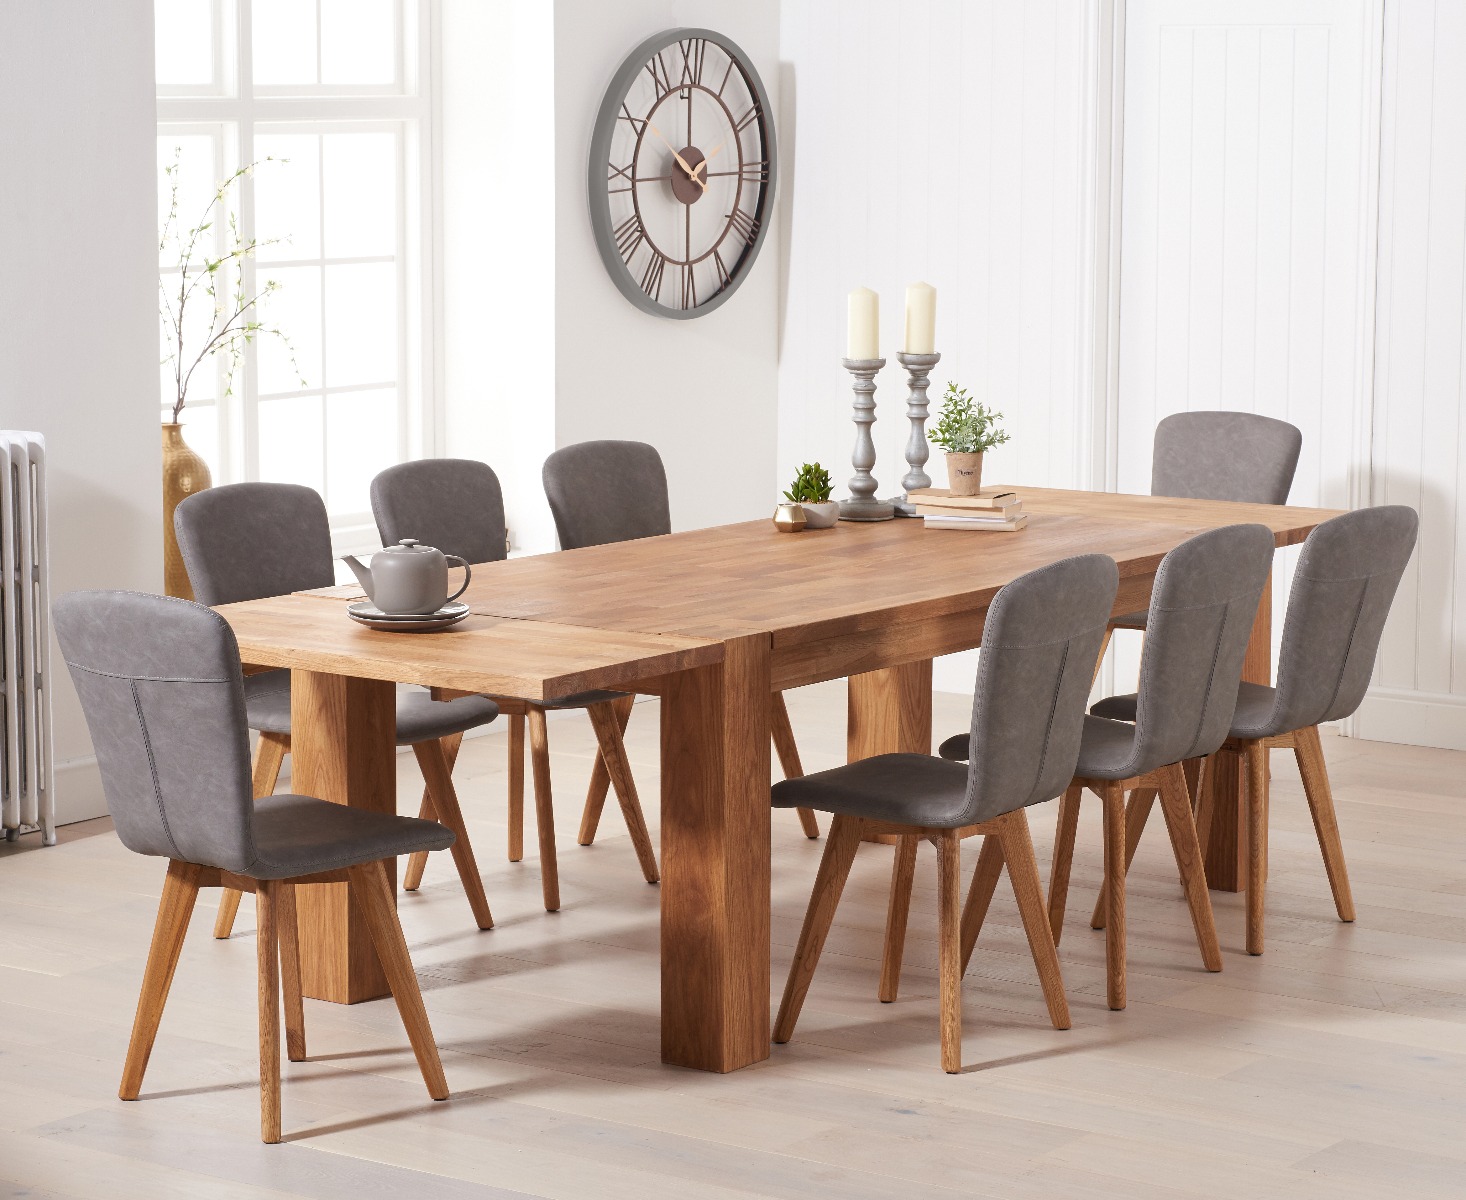 Extending Sheringham 200cm Solid Oak Table With 6 Grey Ruben Faux Leather Chairs